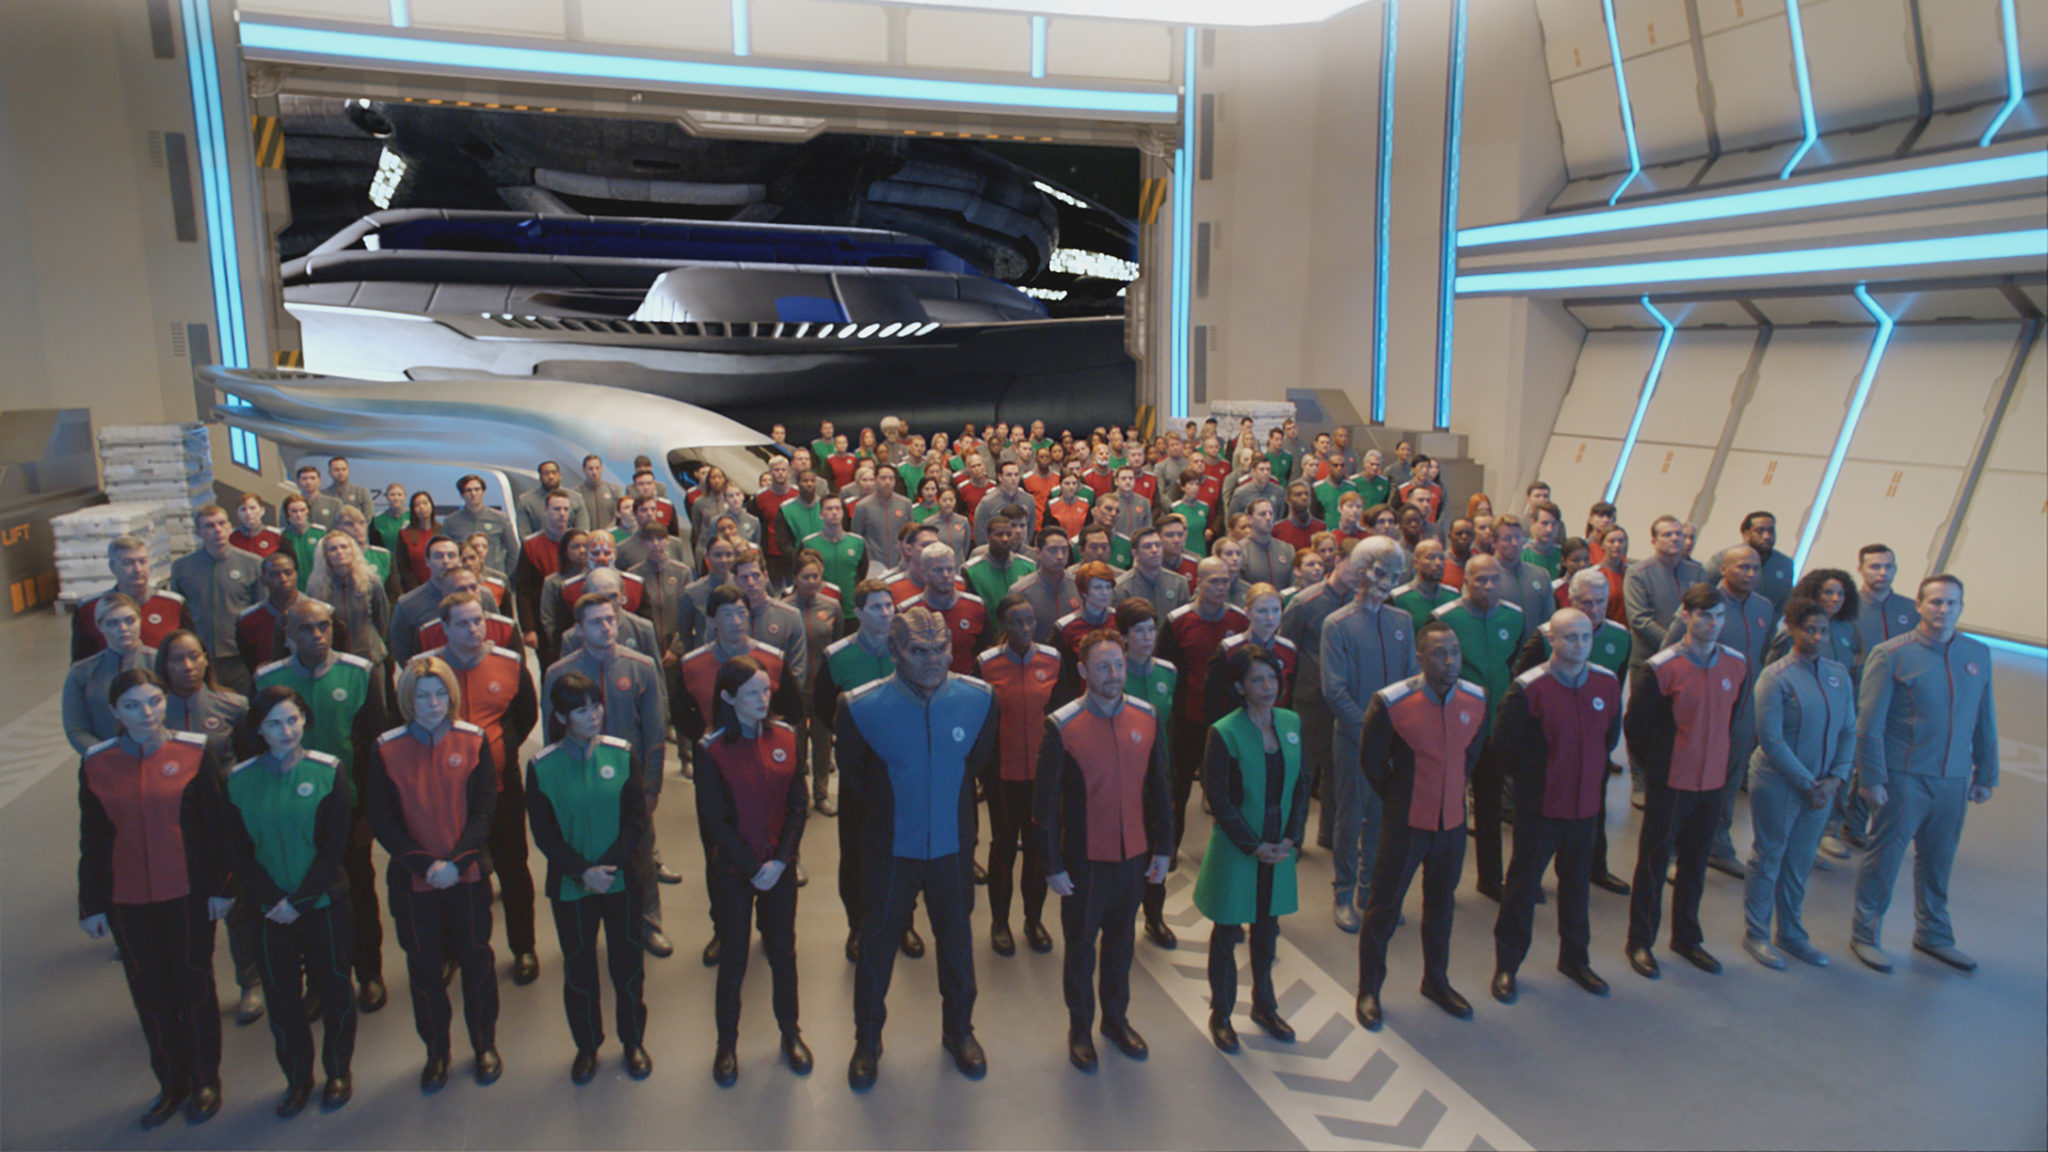 The crew of The Orville